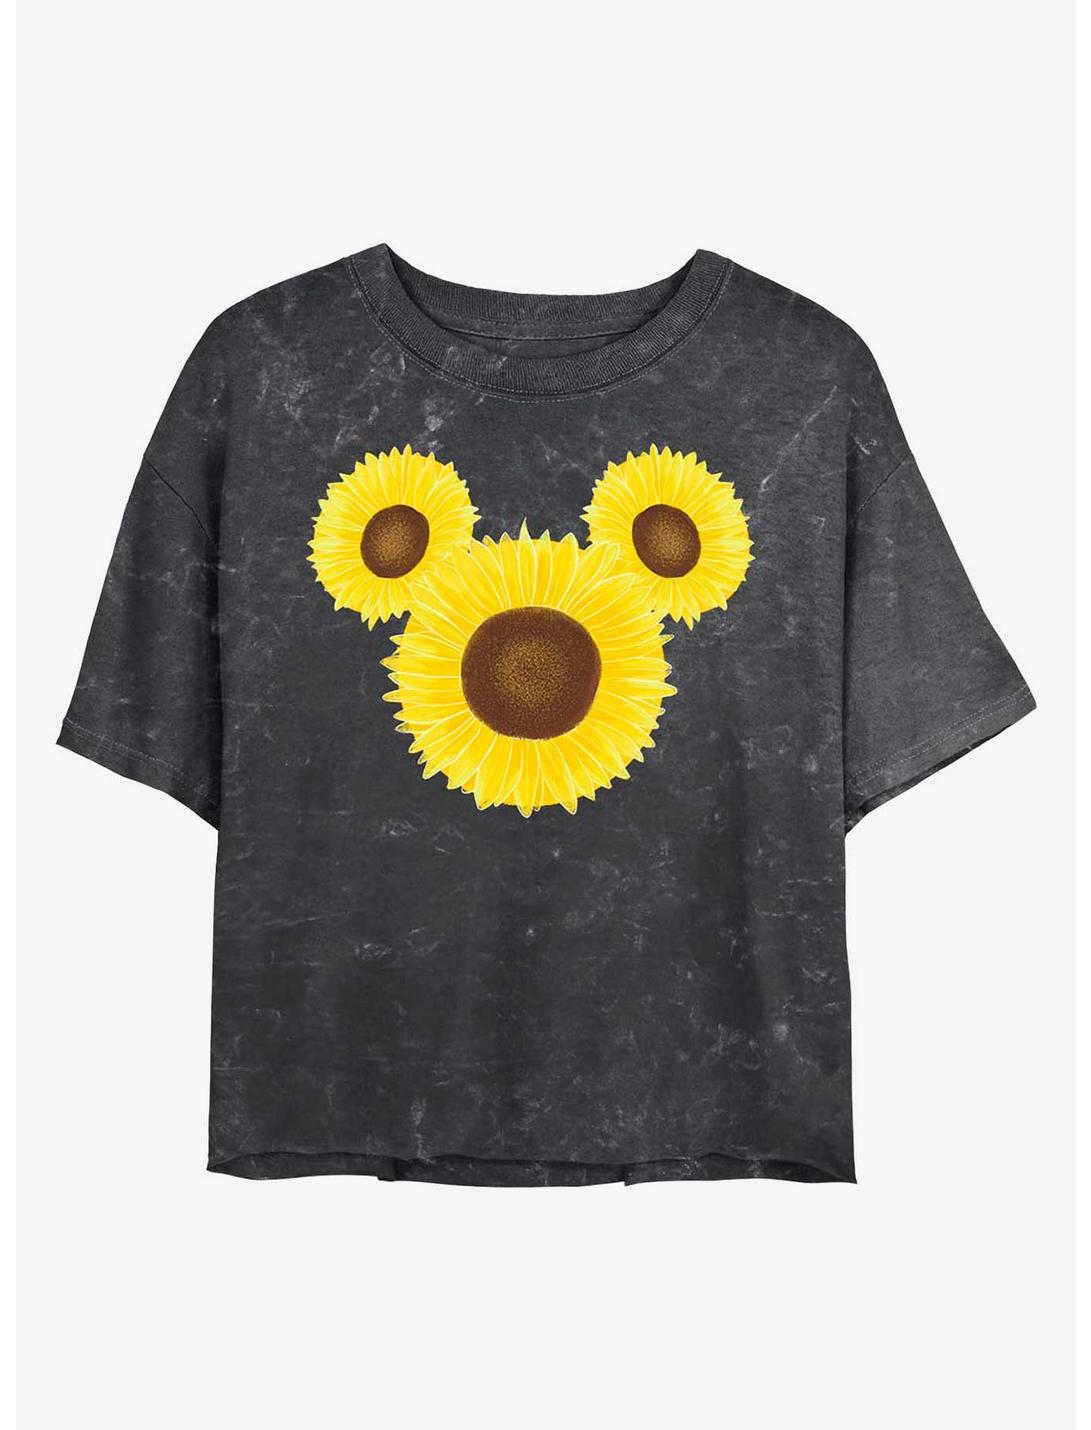 Disney Mickey Mouse Mickey Sunflower Mineral Wash Crop Girls T-Shirt, BLACK, hi-res